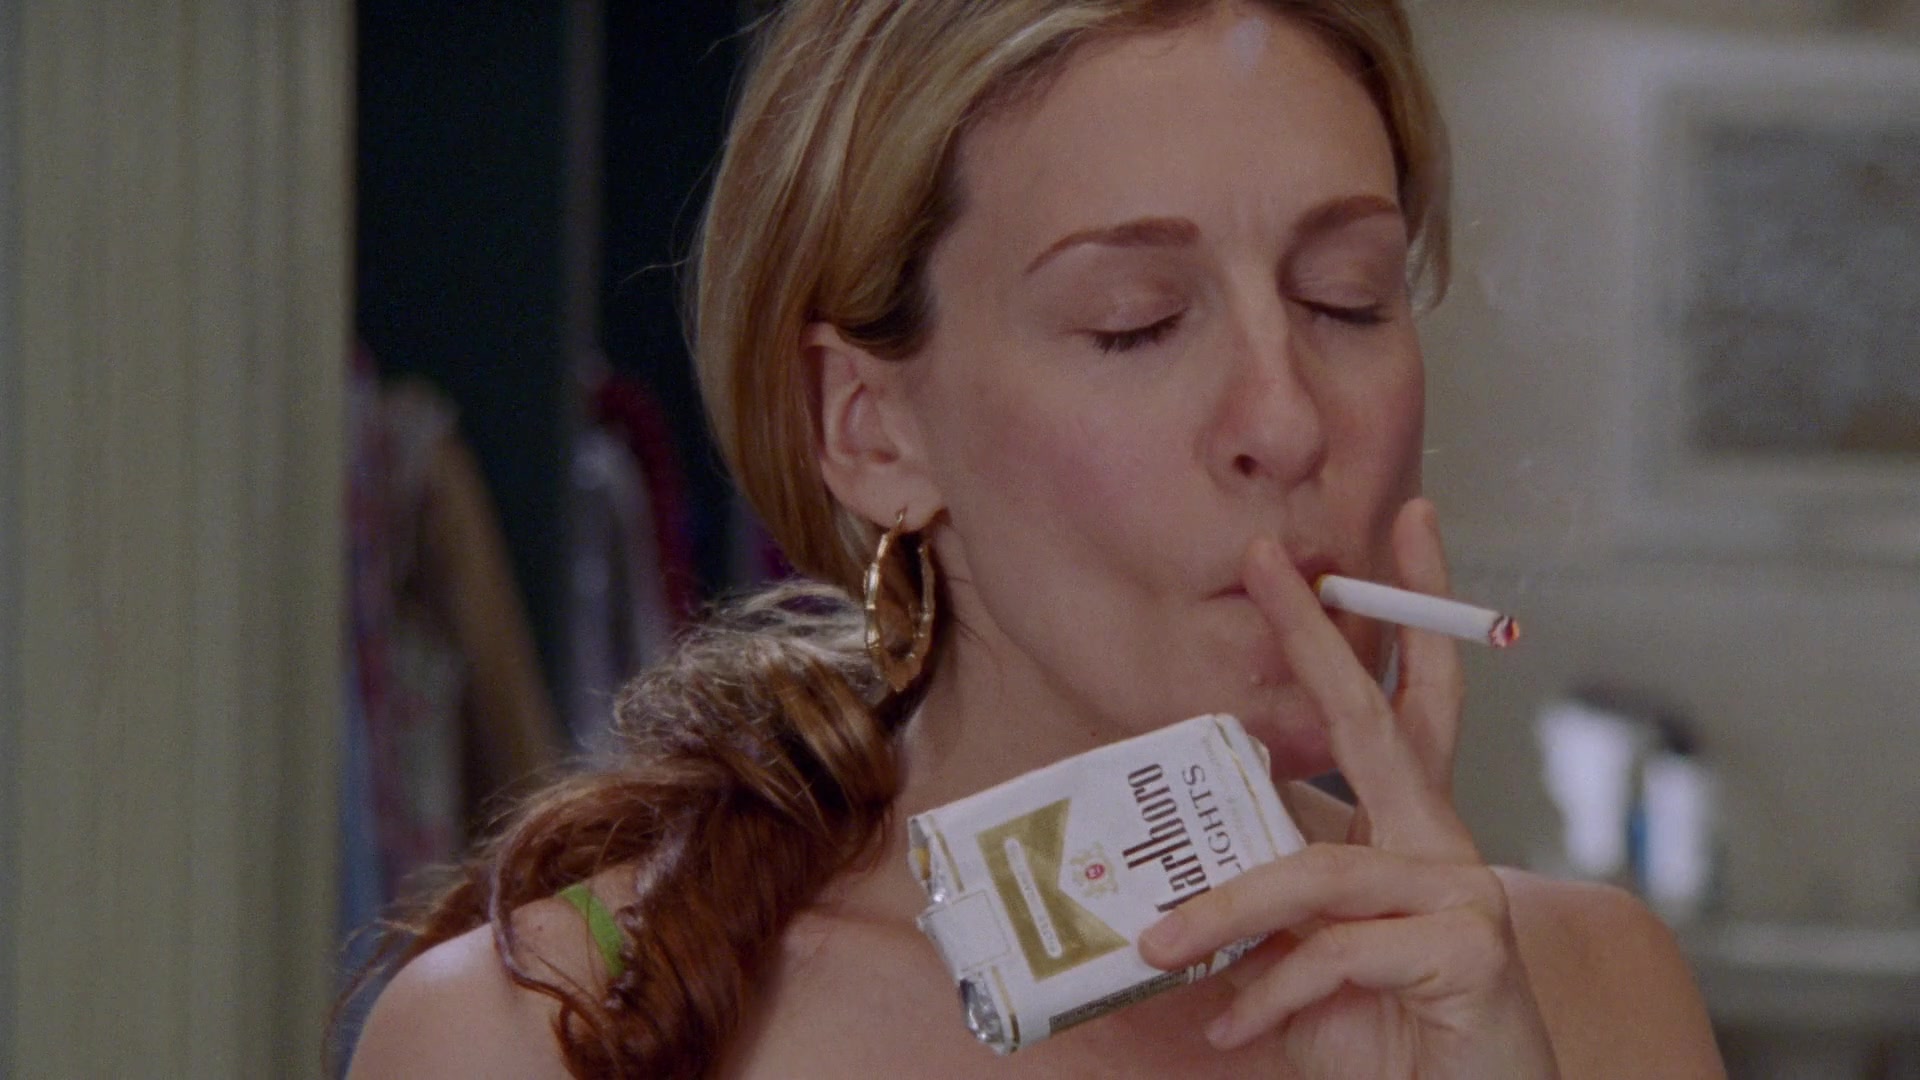 Marlboro Lights Cigarettes Of Sarah Jessica Parker As Carrie Bradshaw In Se...